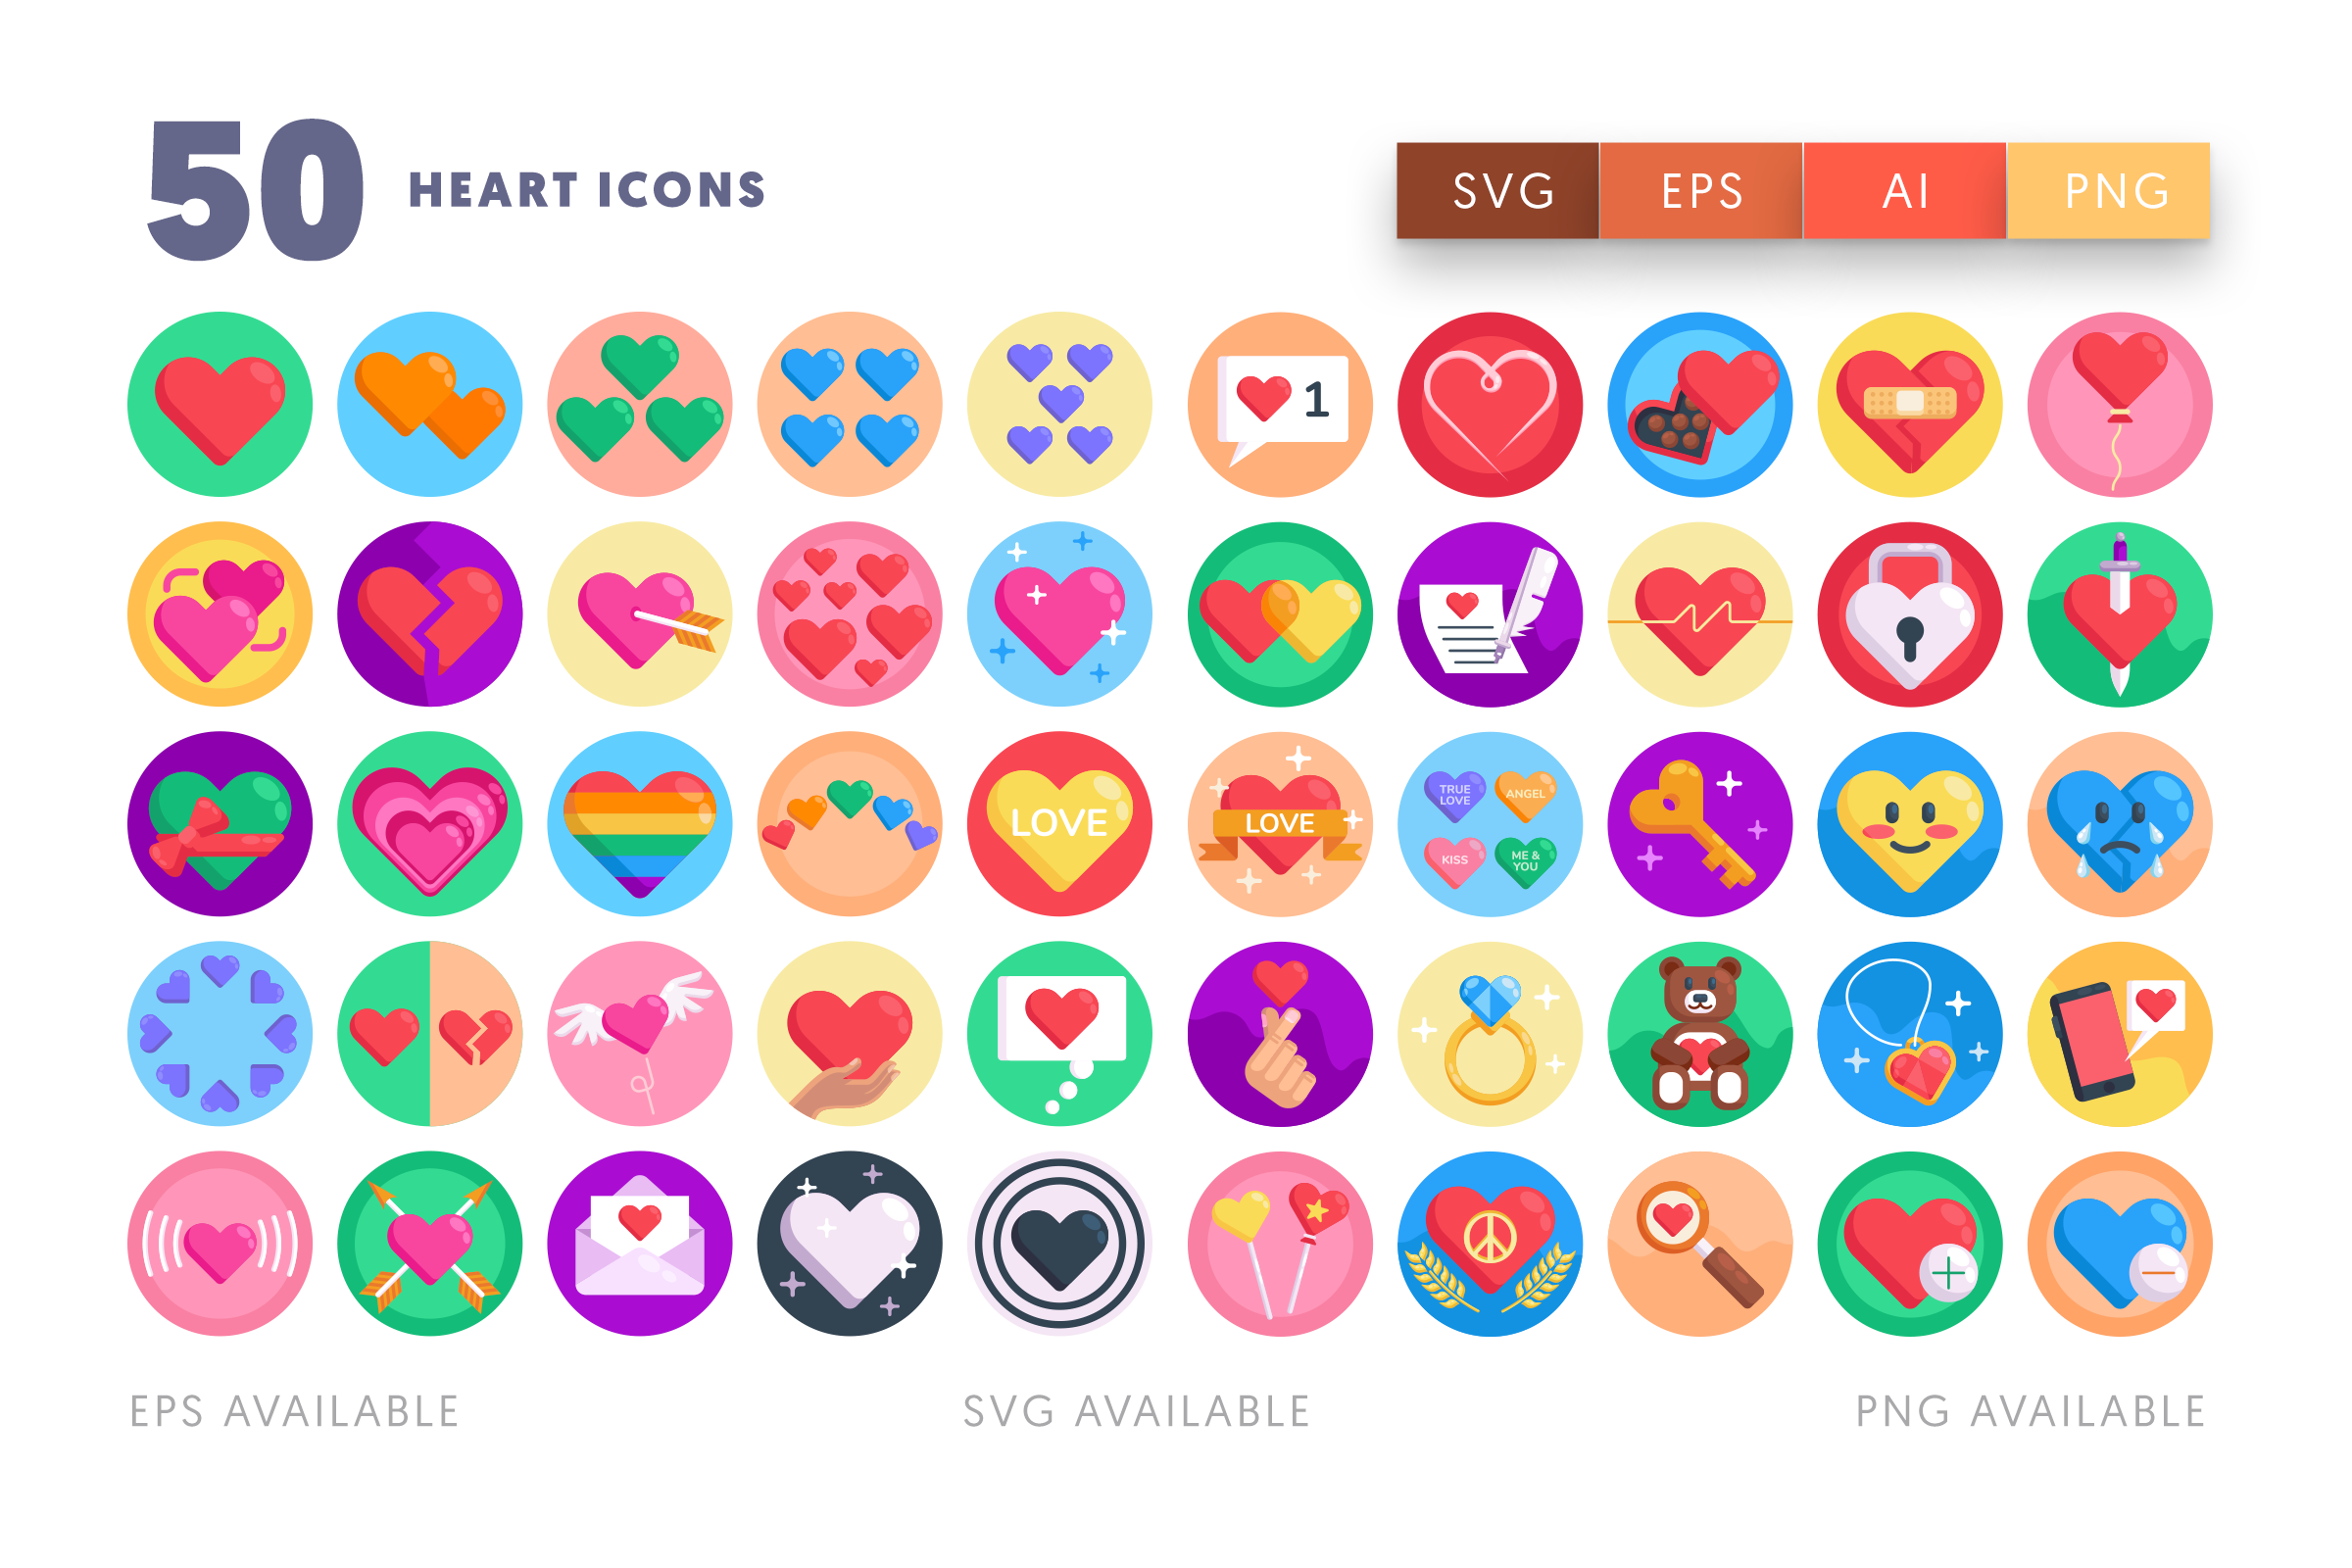 Heart icons png/svg/eps